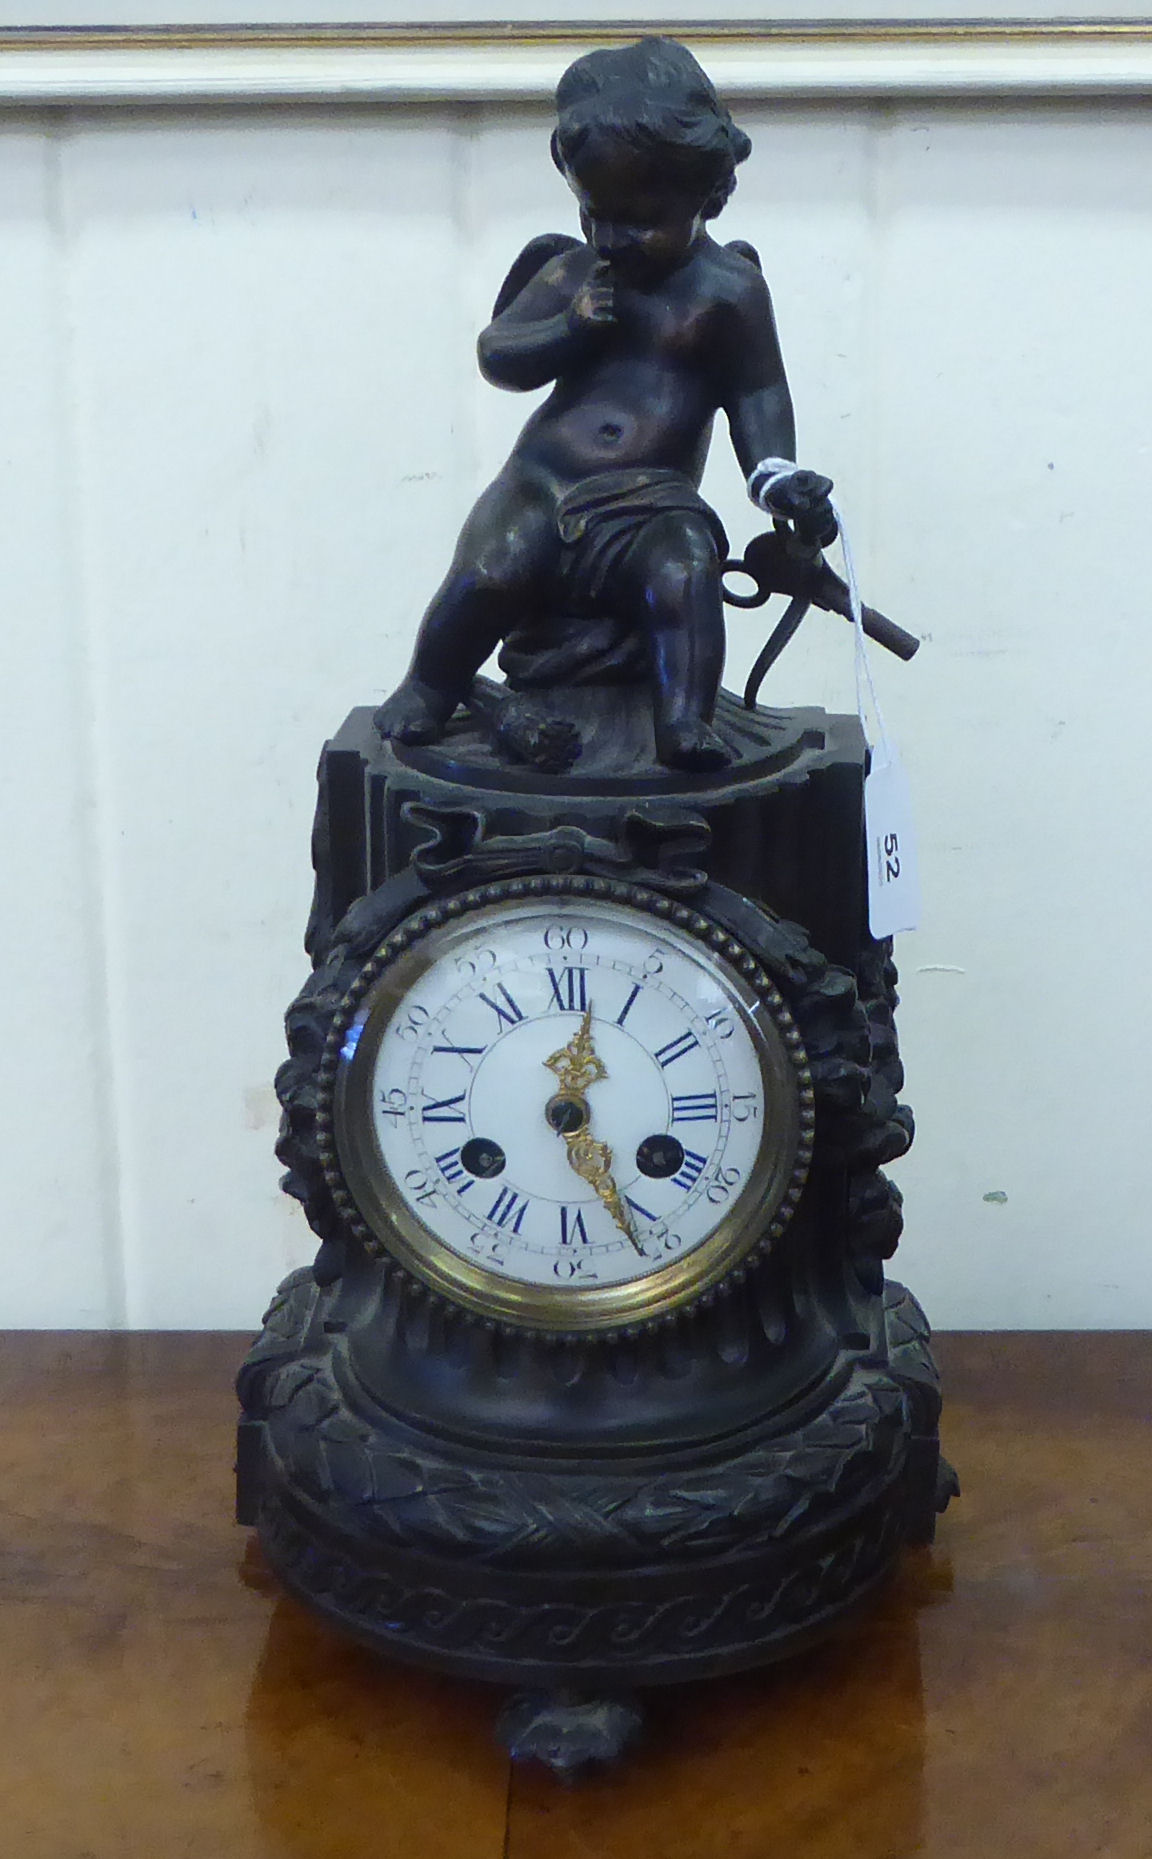 A reproduction of a 19thC French bronzed finished mantel clock; faced by a Roman dial  14"h